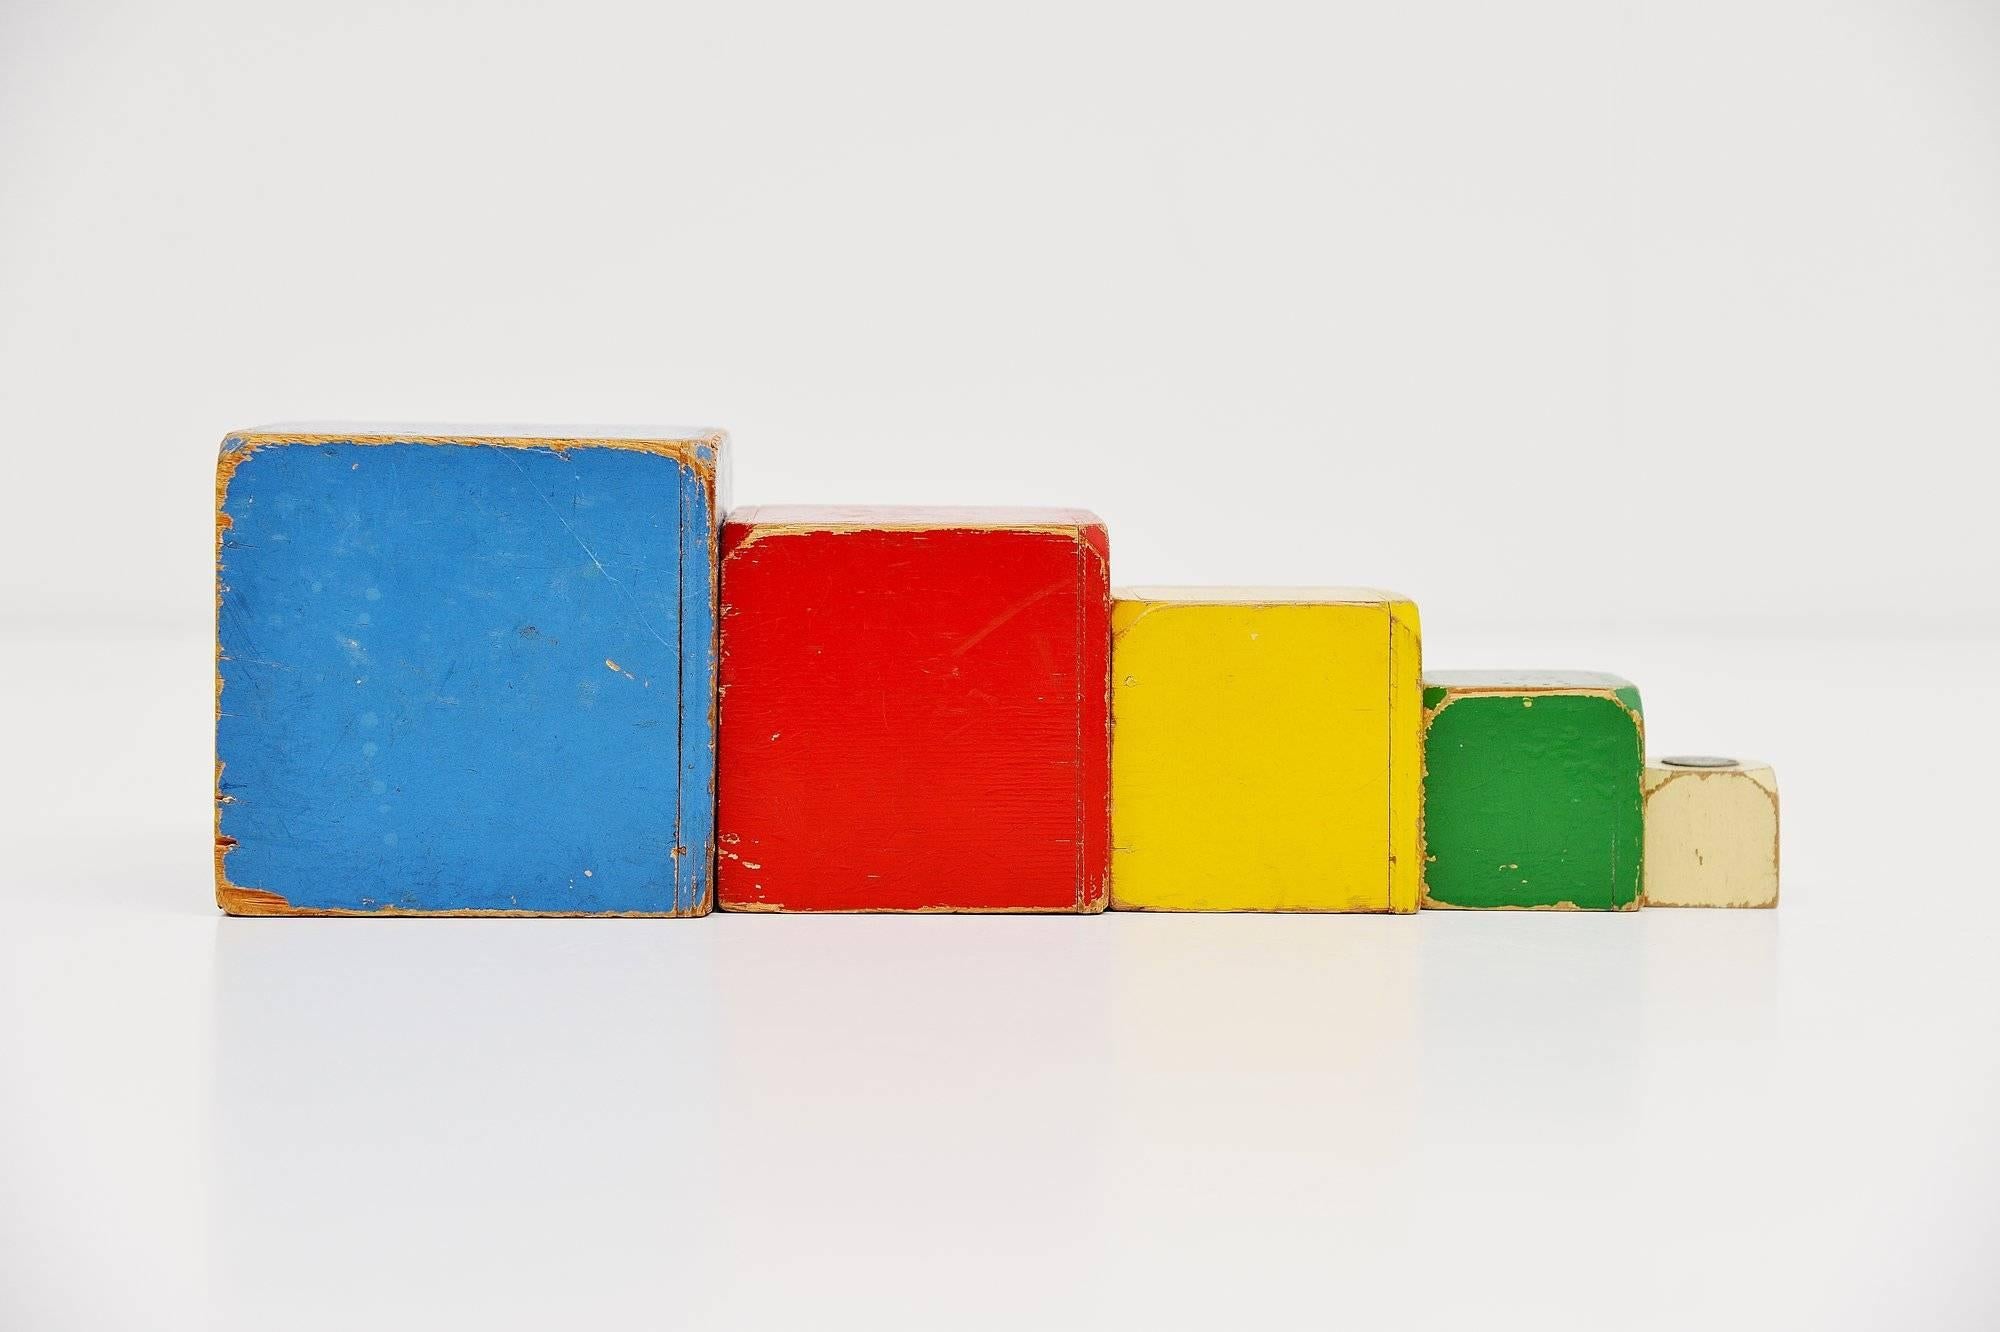 Very nice decorative wooden toy cubes set, designed by Ko Verzuu for Ado Holland in the 1950s. Ado means Arbeid door onvolwaardigen, translated; labor by incapacitated, which makes this an even more special piece. Toys by Ado are being highly